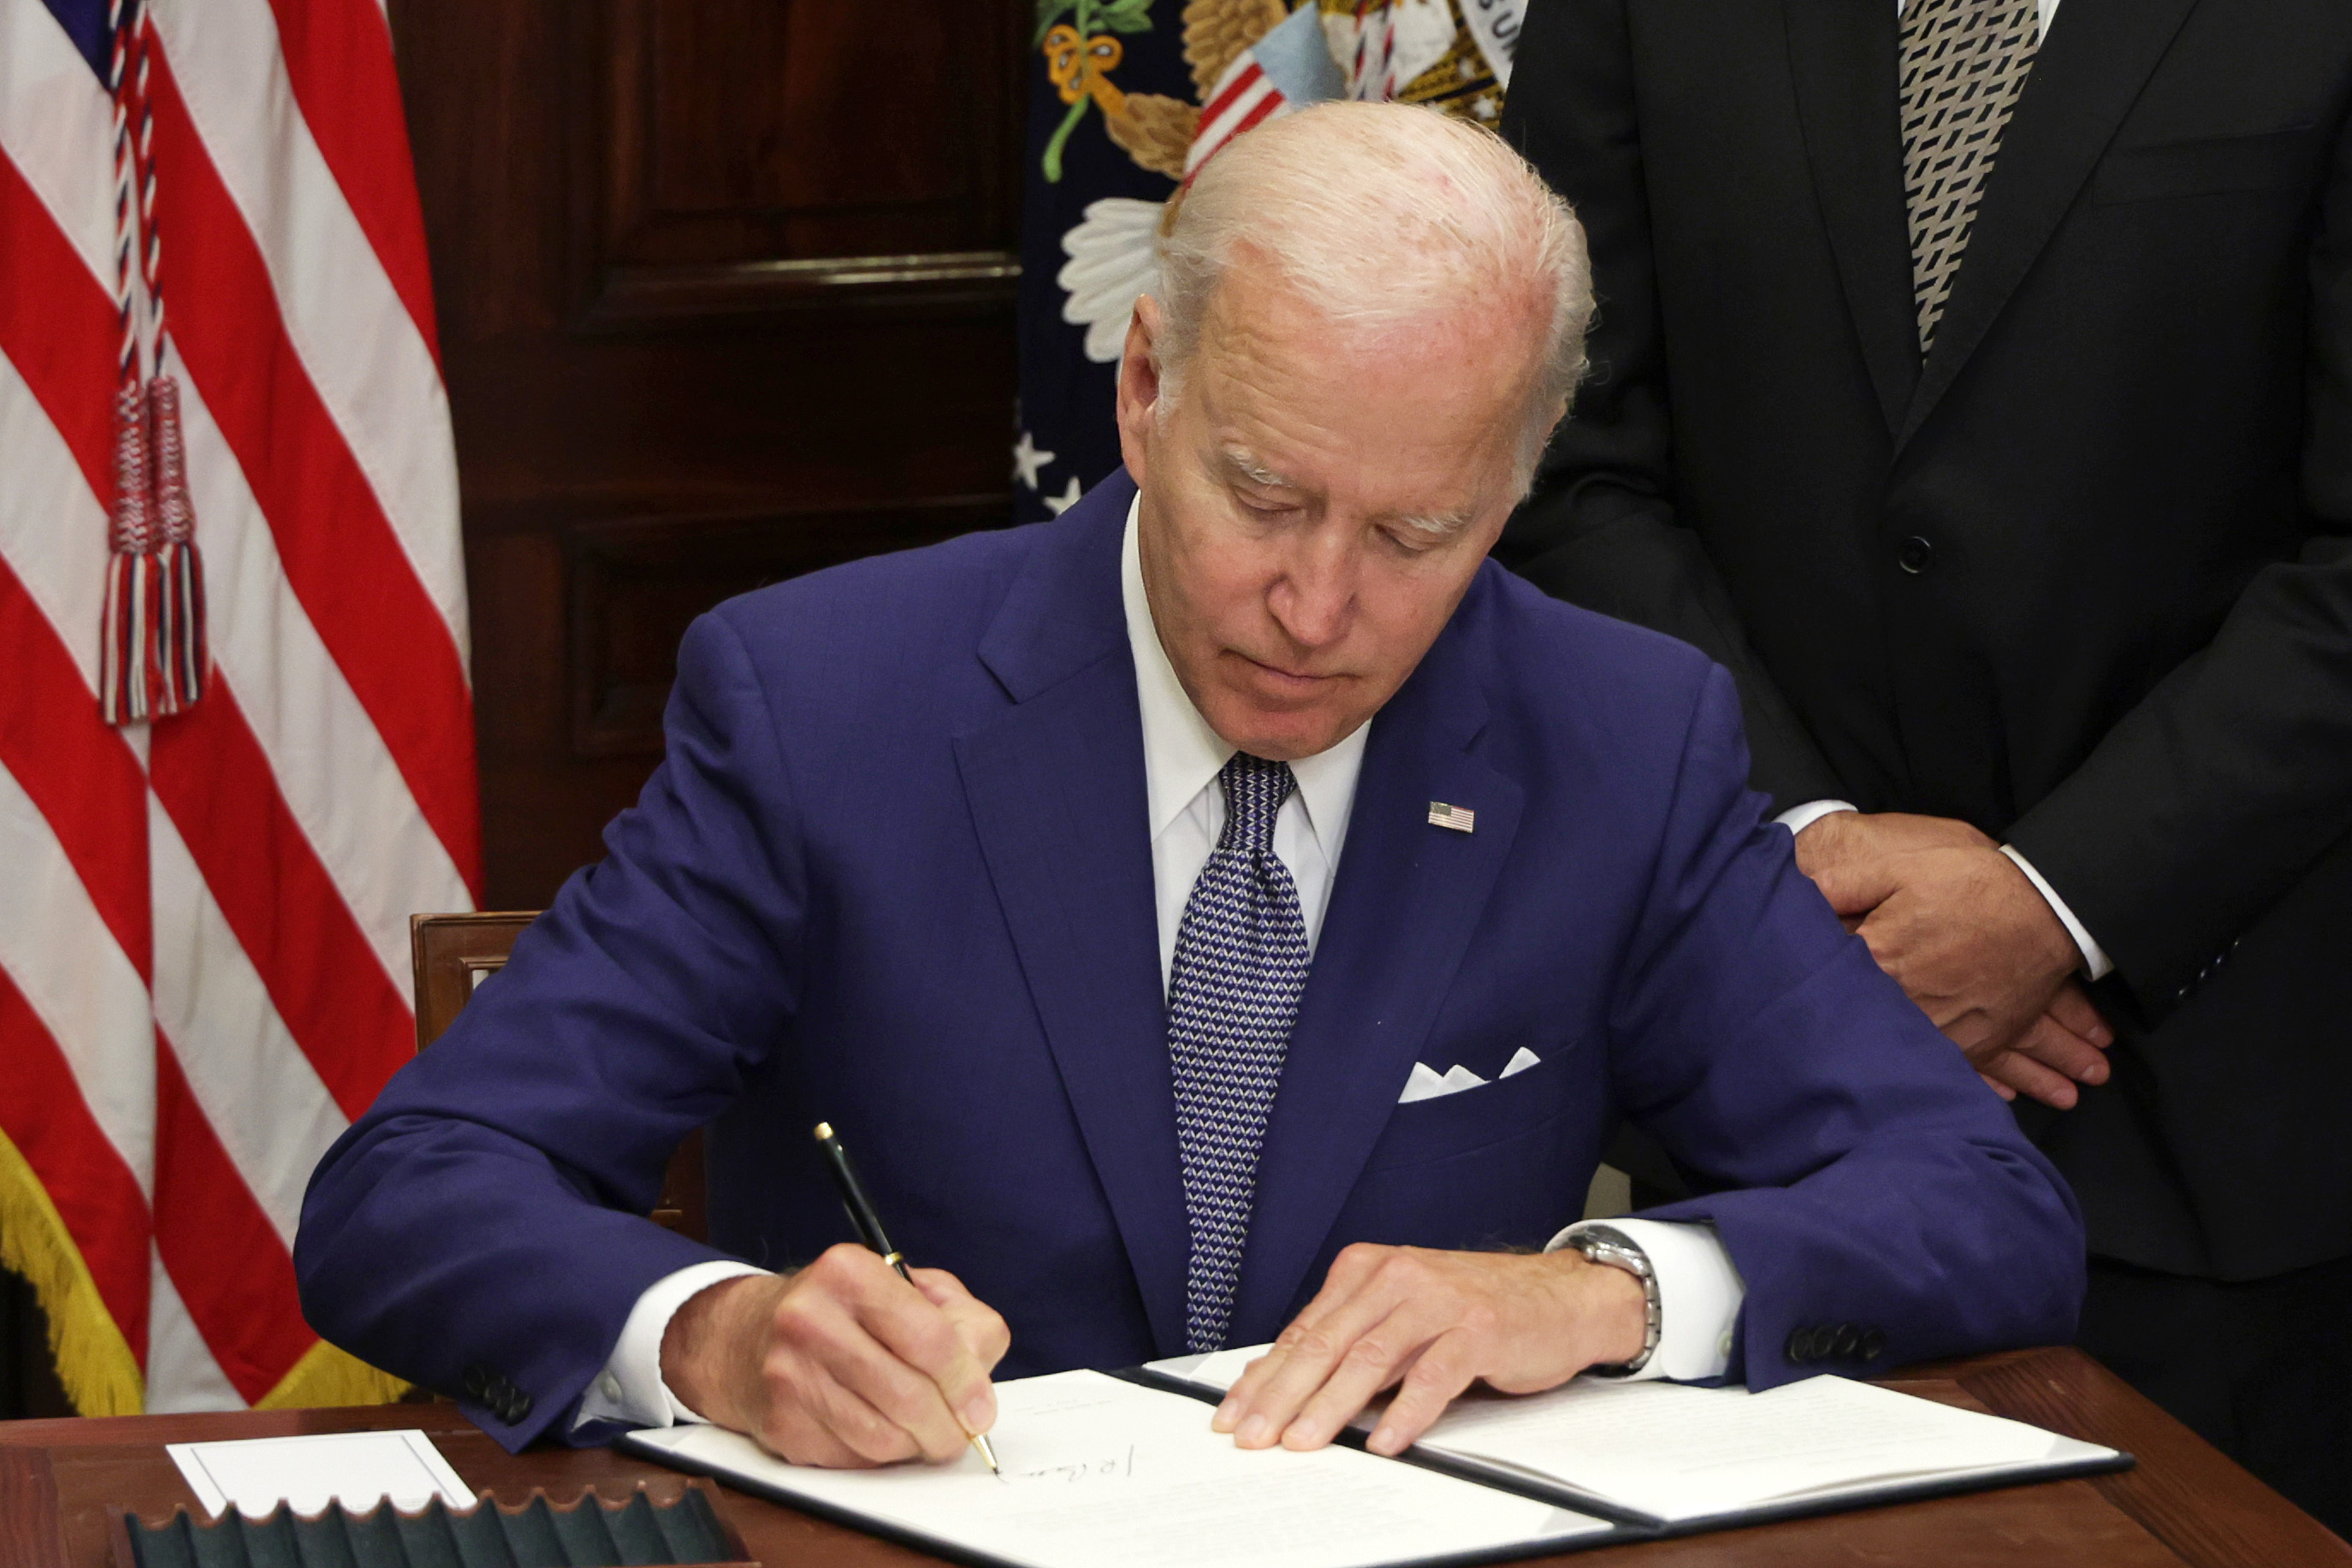 President Joe Biden sit in front of a desk and signs an executive order.